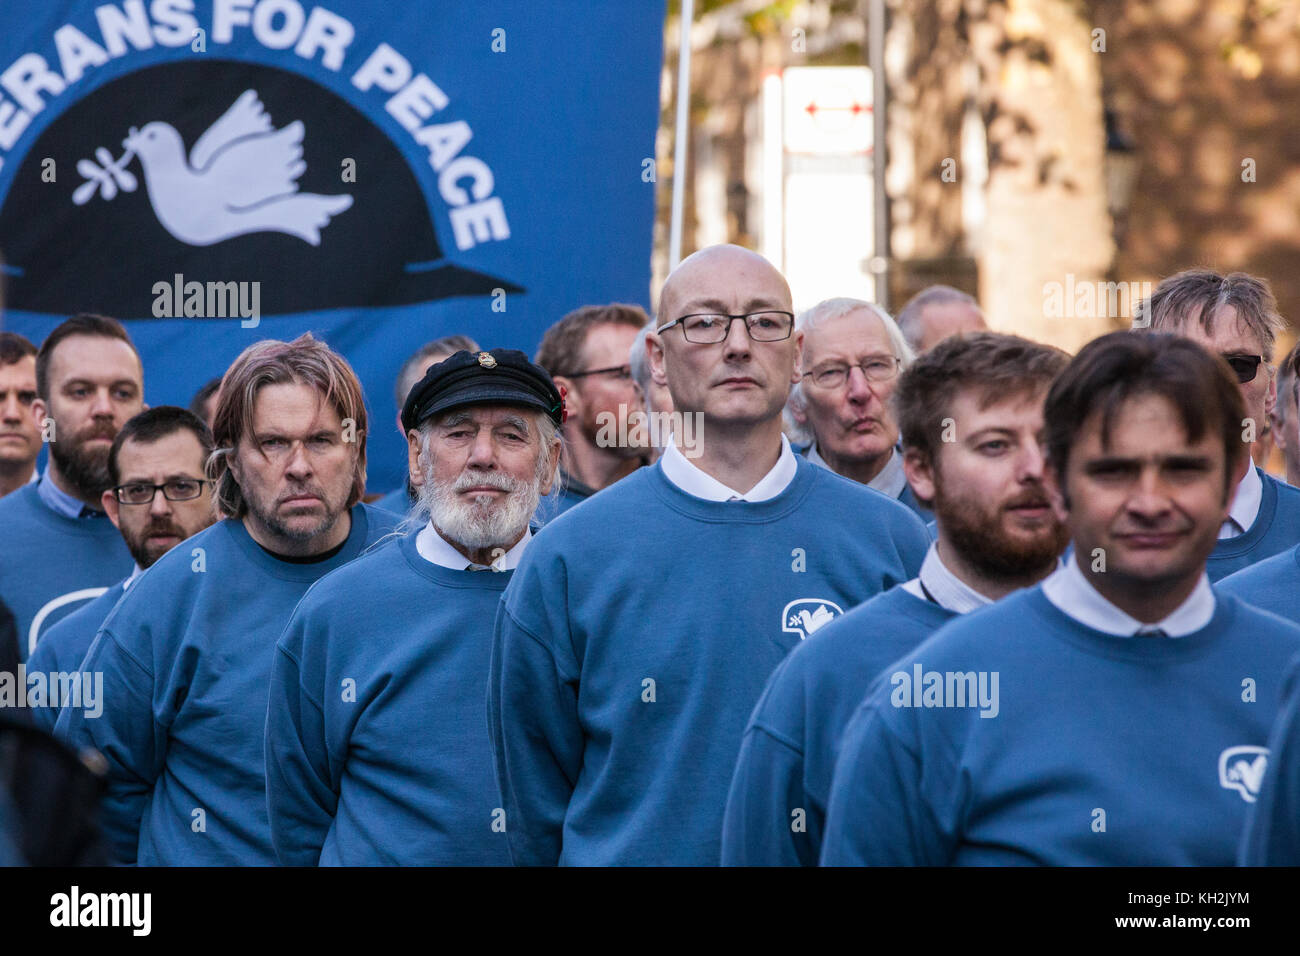 London, UK. 12th November, 2017. Jim Radford (c), D-Day veteran, folk singer and peace campaigner, prepares to walk to the Cenotaph with ex-services men and women from Veterans For Peace UK (VFP UK) on Remembrance Sunday. VFP UK was founded in 2011 and works to influence the foreign and defence policy of the UK for the larger purpose of world peace. Credit: Mark Kerrison/Alamy Live News Stock Photo